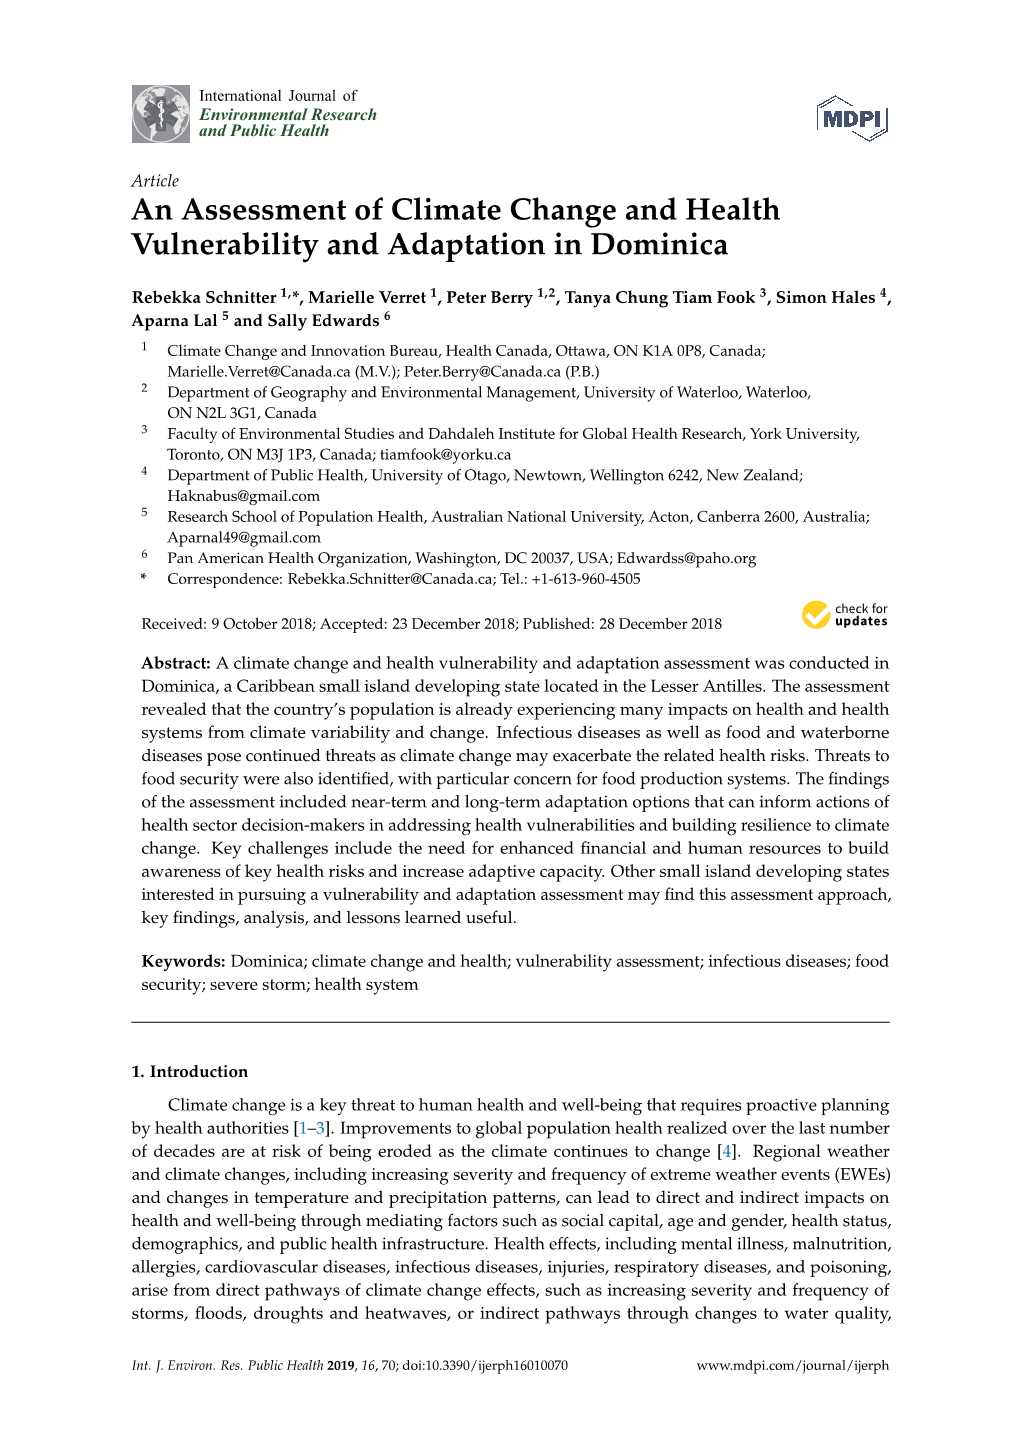 An Assessment of Climate Change and Health Vulnerability and Adaptation in Dominica